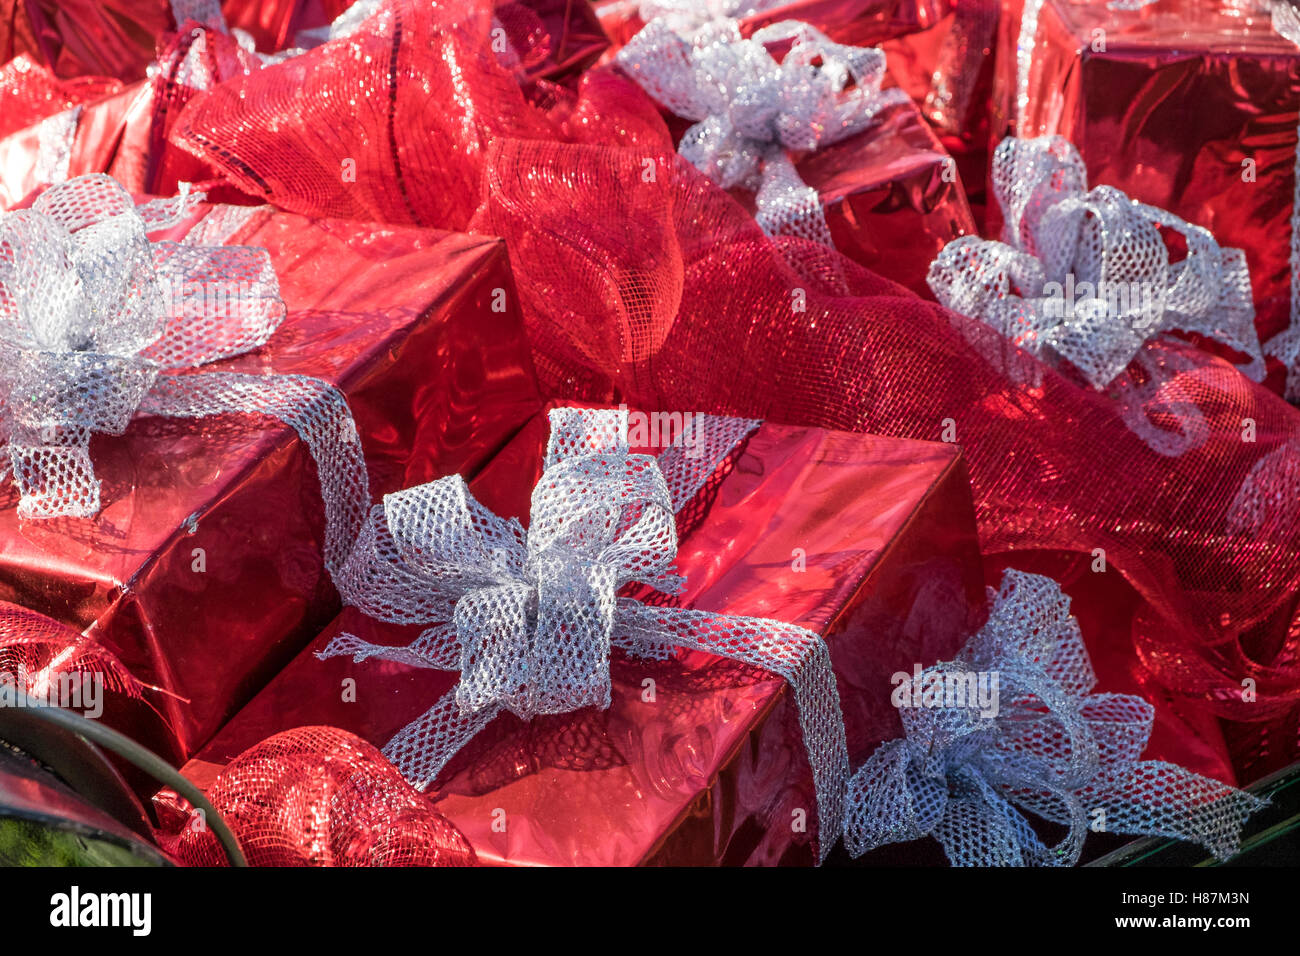 Gifts wrapped in red foil paper and silver ribbon tied in bows. Stock Photo